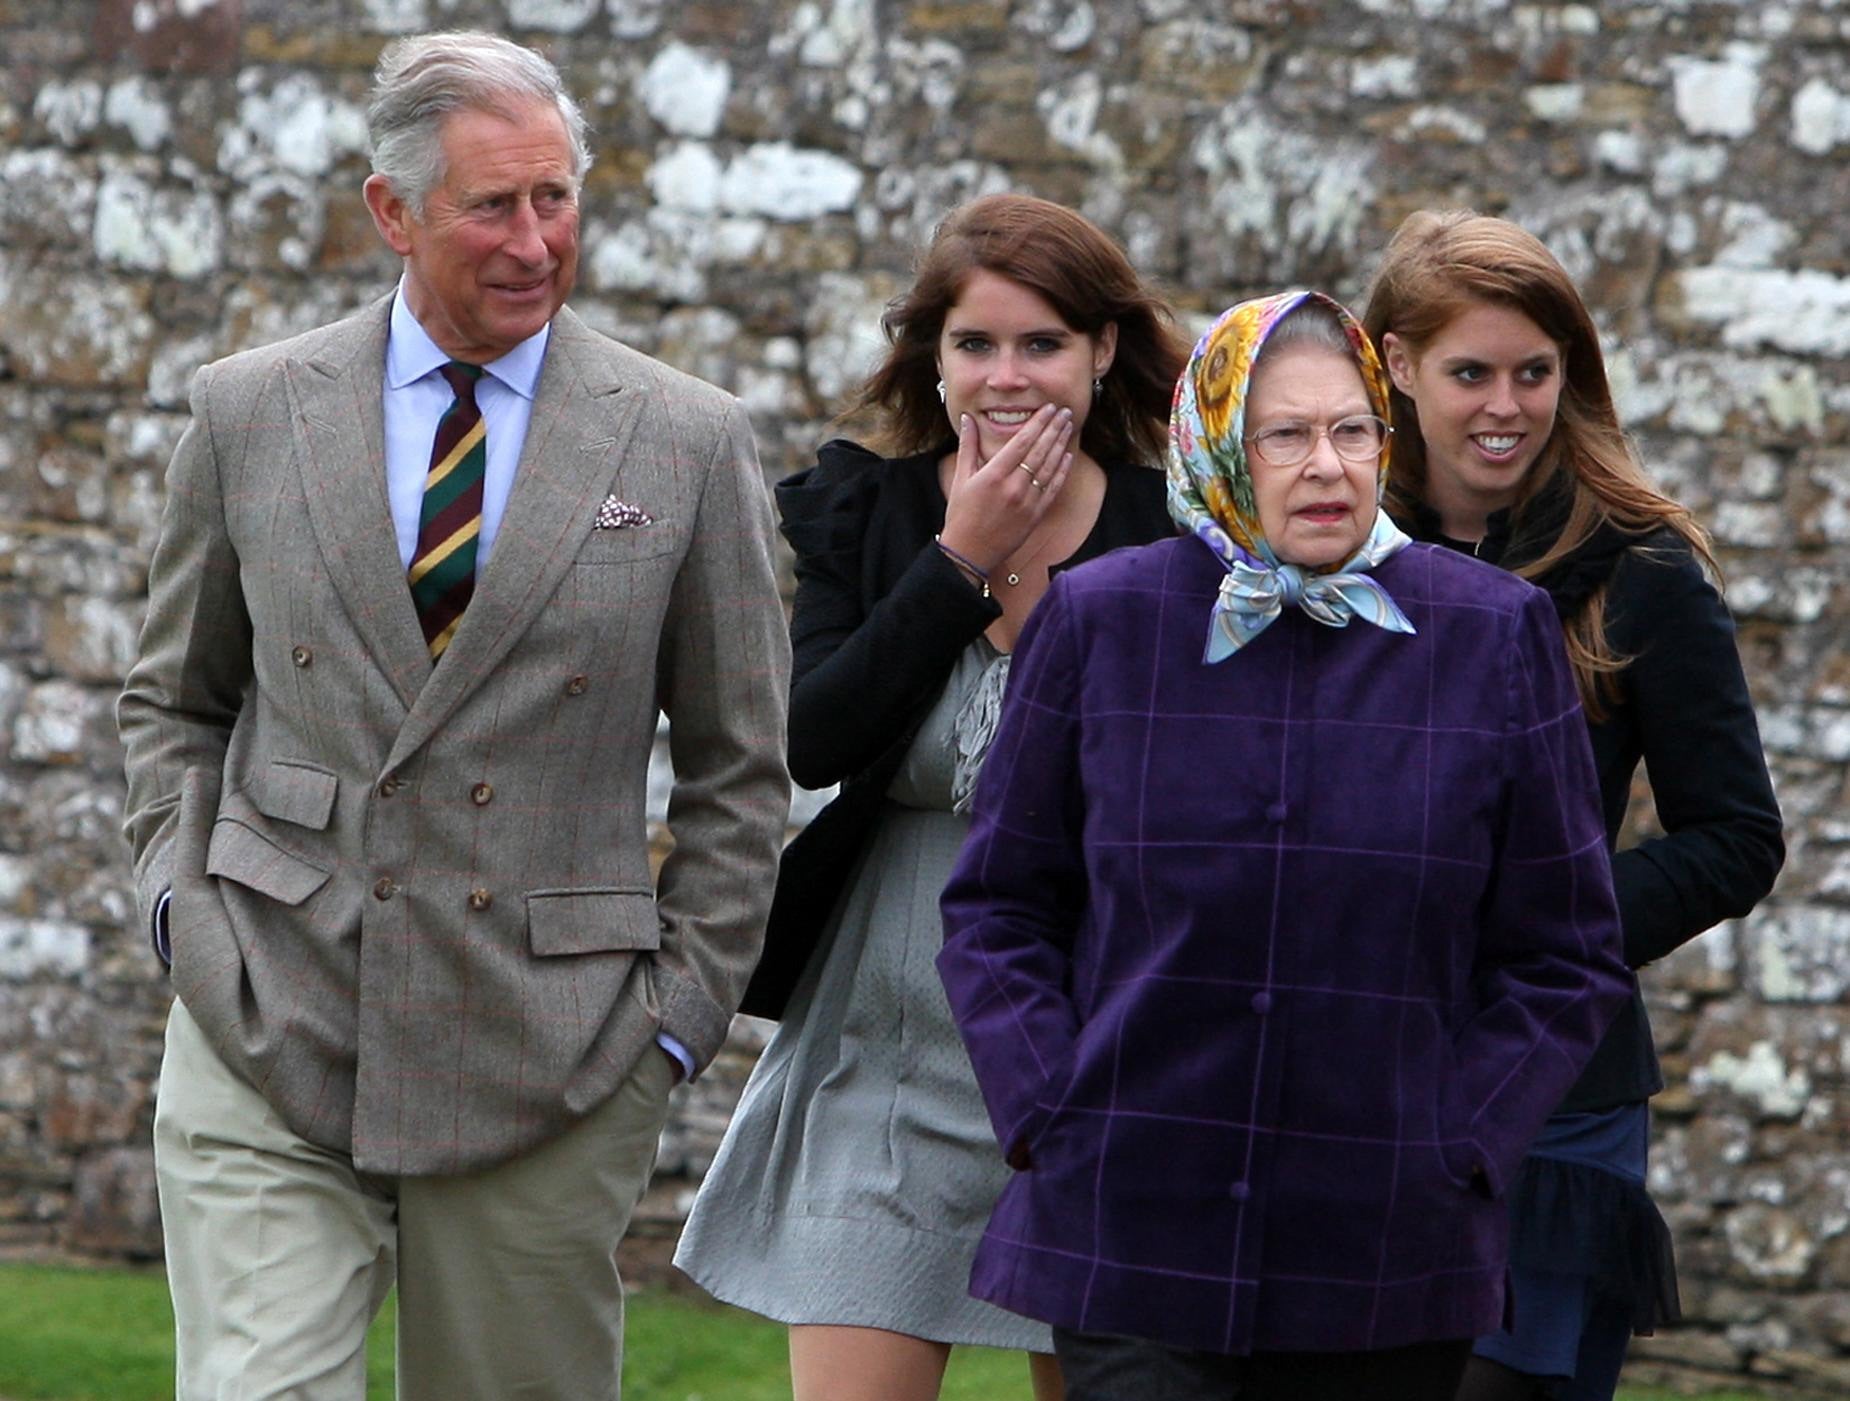 The Queen with the Prince of Wales (left), Princess Eugenie, (back left), and Princess Beatrice (back right) and the rest of the Royal family at the Castle of Mey after disembarking the Hebridean Princess boat after a private family holiday with Queen Elizabeth II around the Western Isles of Scotland.